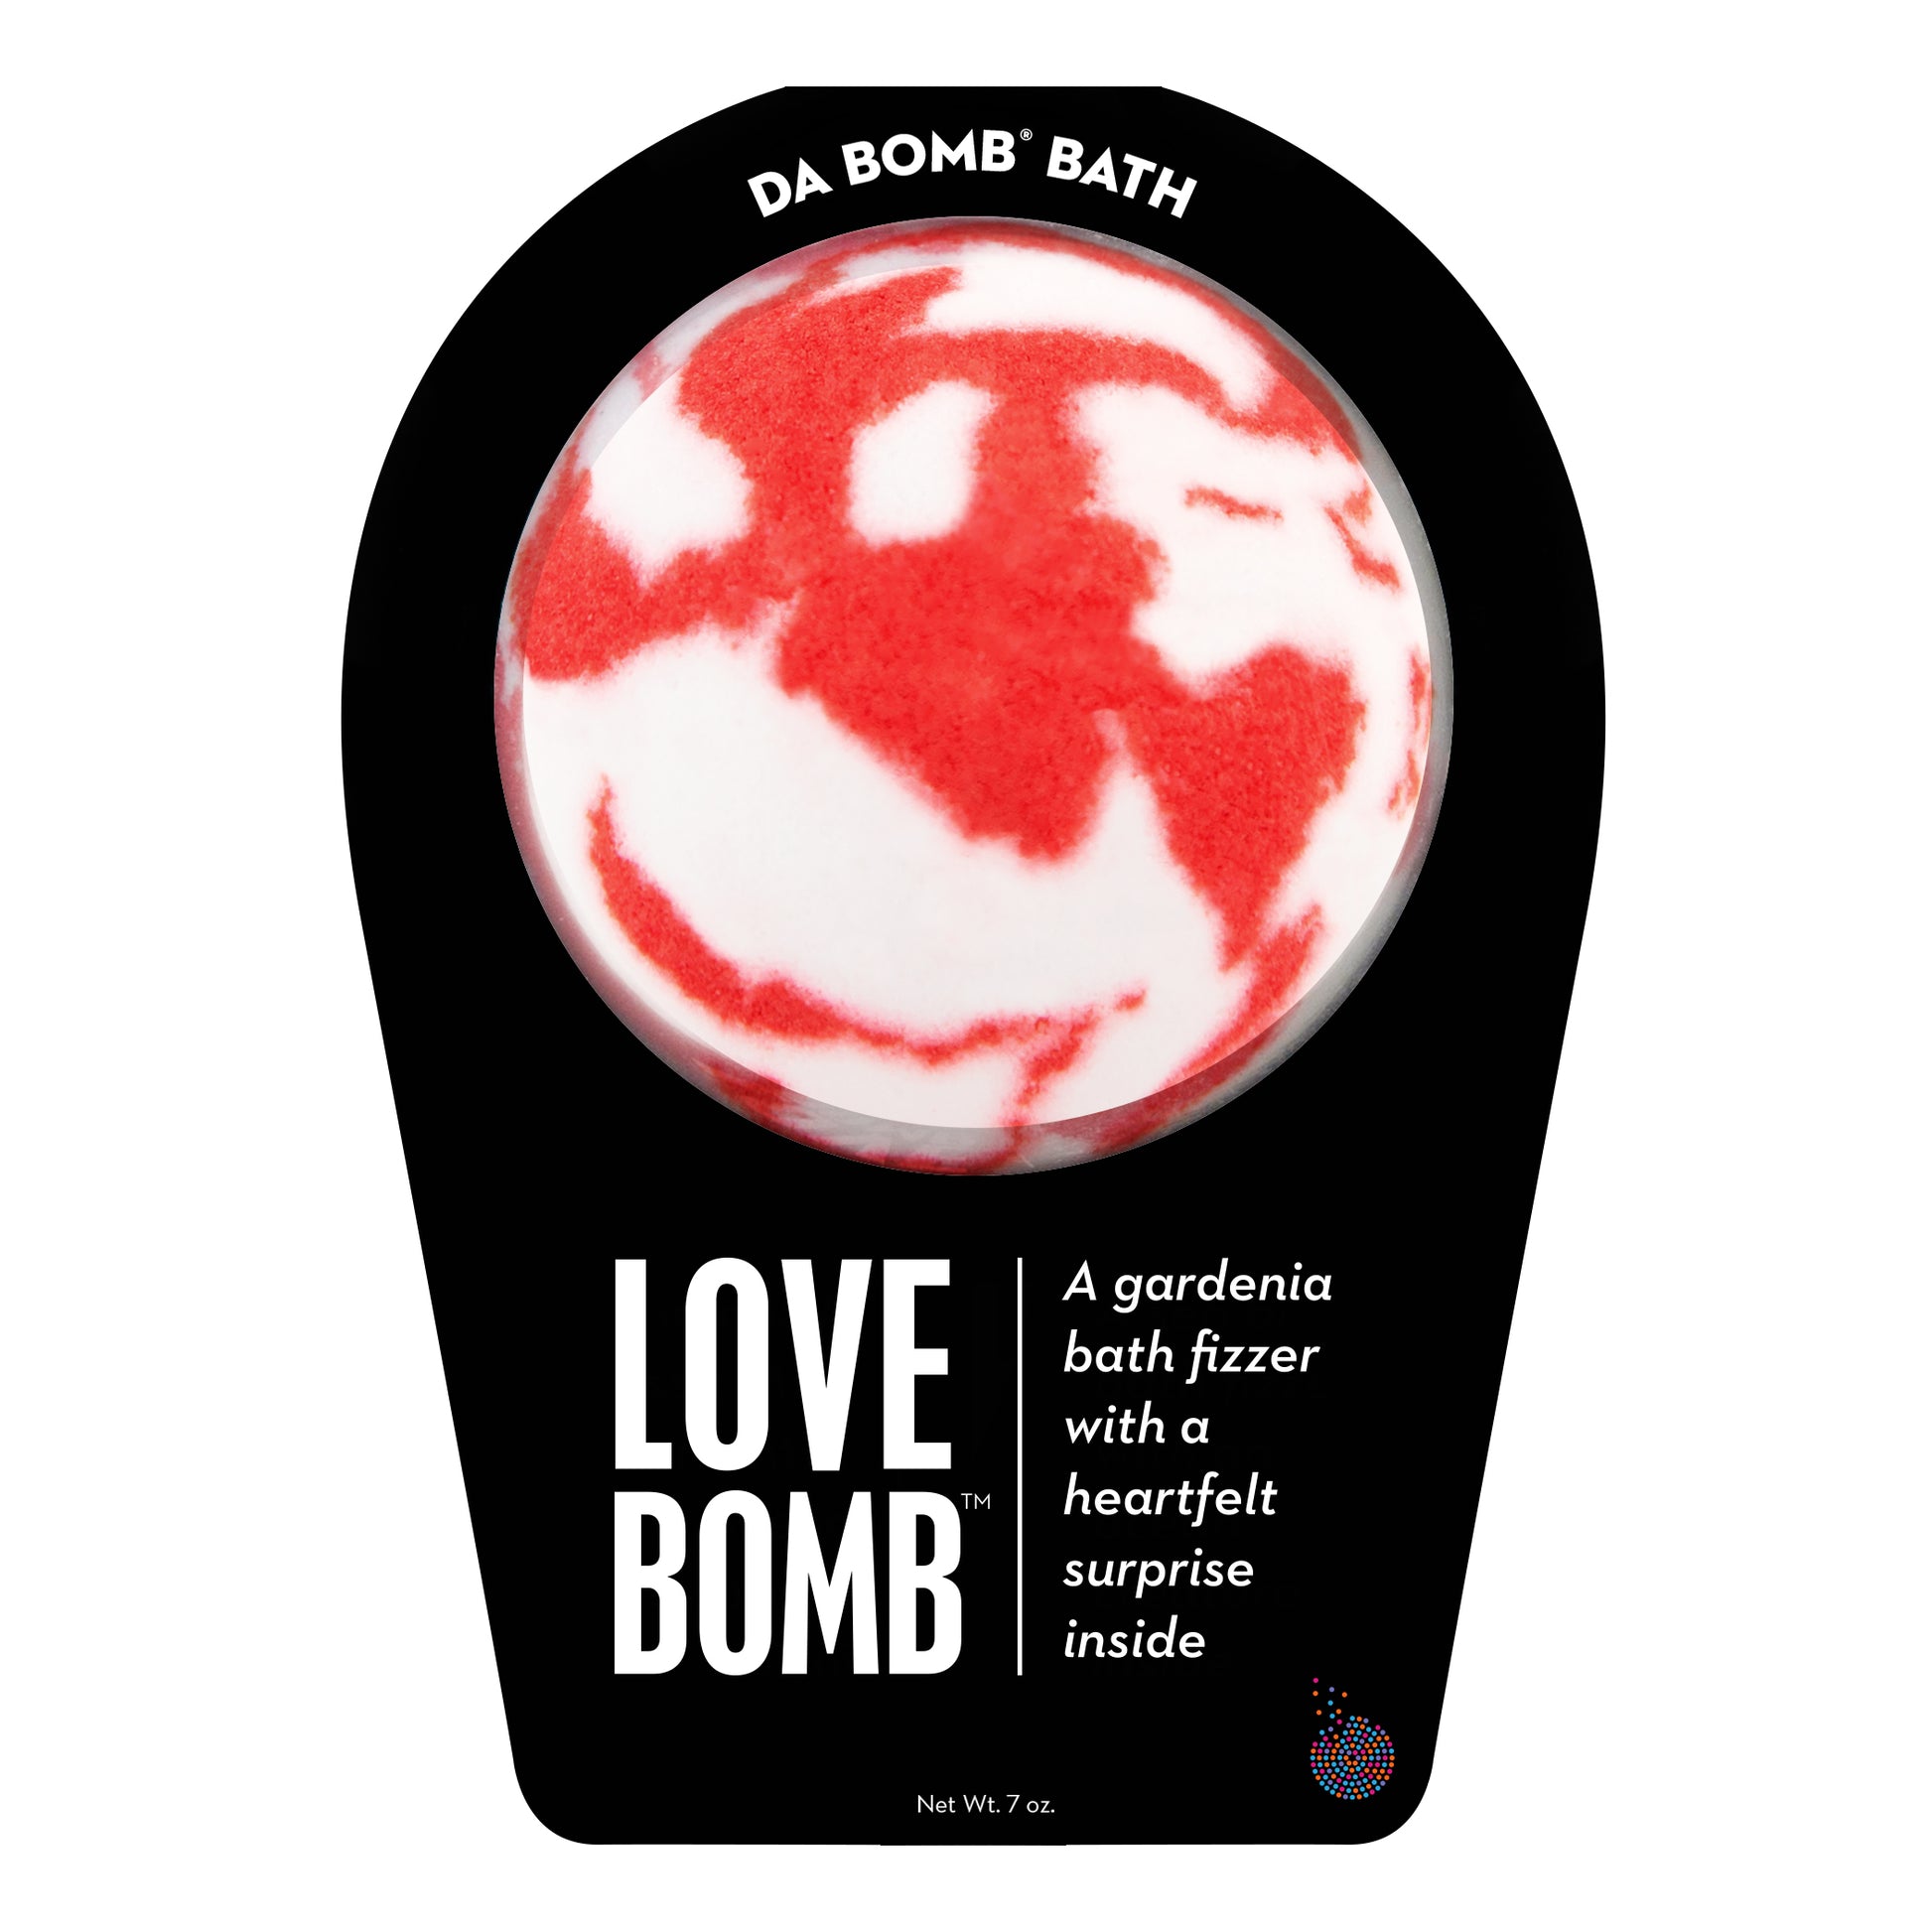 White and red Love Bomb with a surprise inside, scented as gardenia.